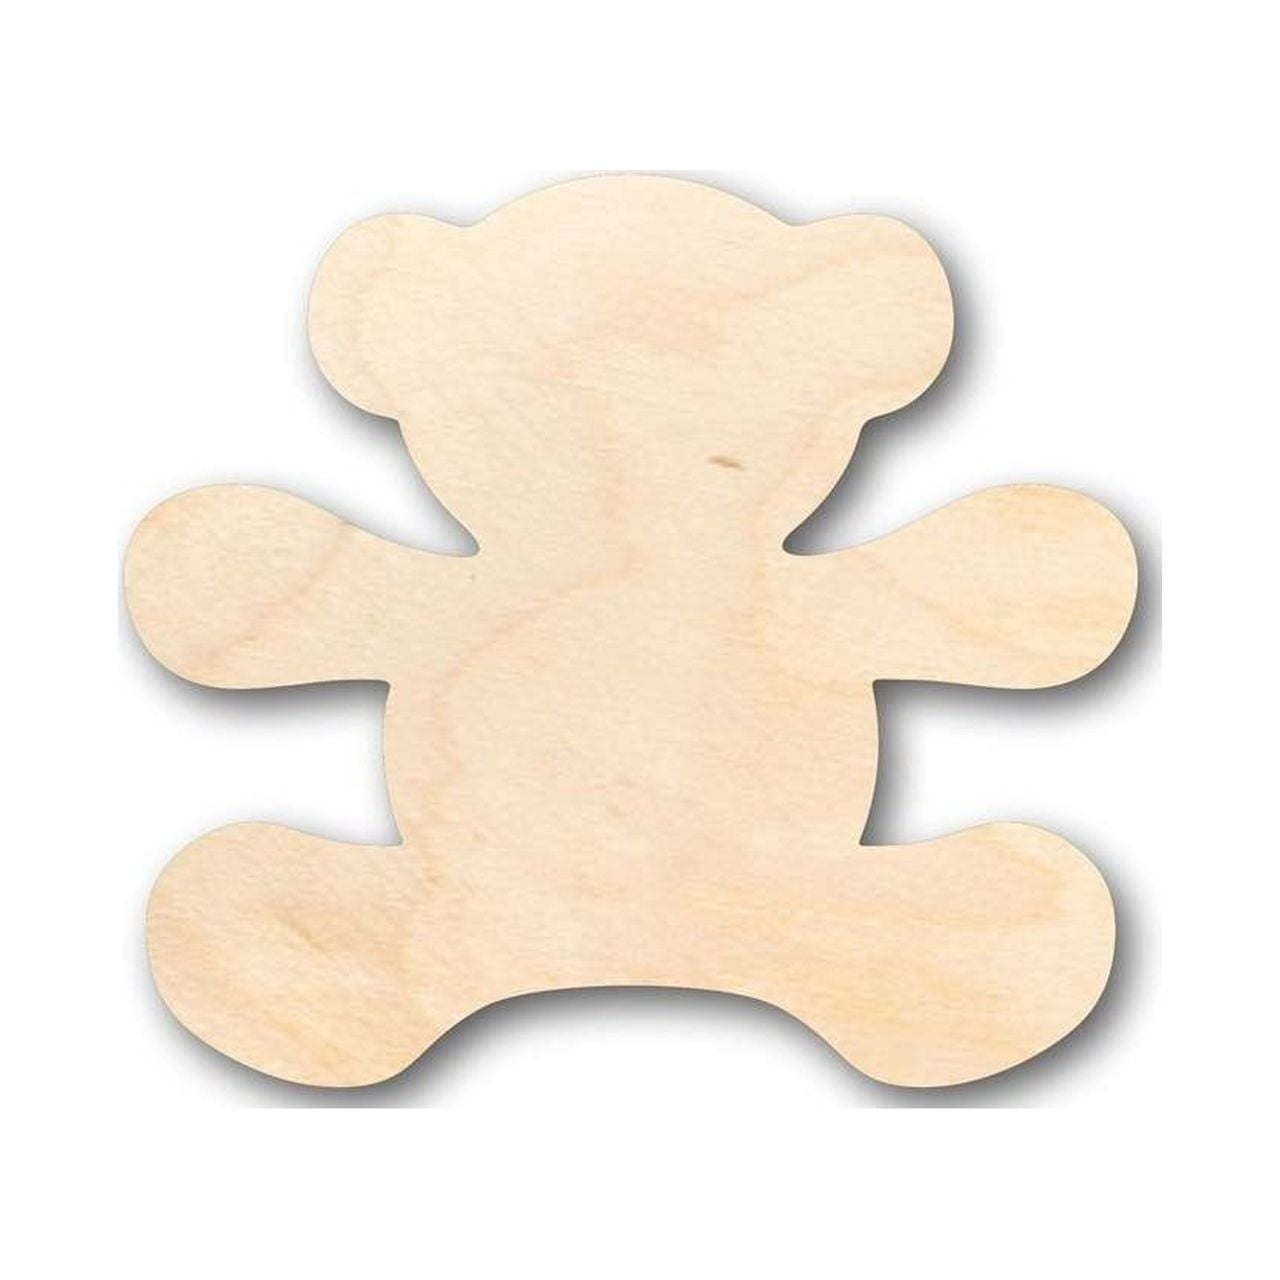 Juvale 24 Pack Wooden Teddy Bear Cutouts for Crafts, Unfinished Wood Pieces for DIY Projects (3.7 x 3.5 in)